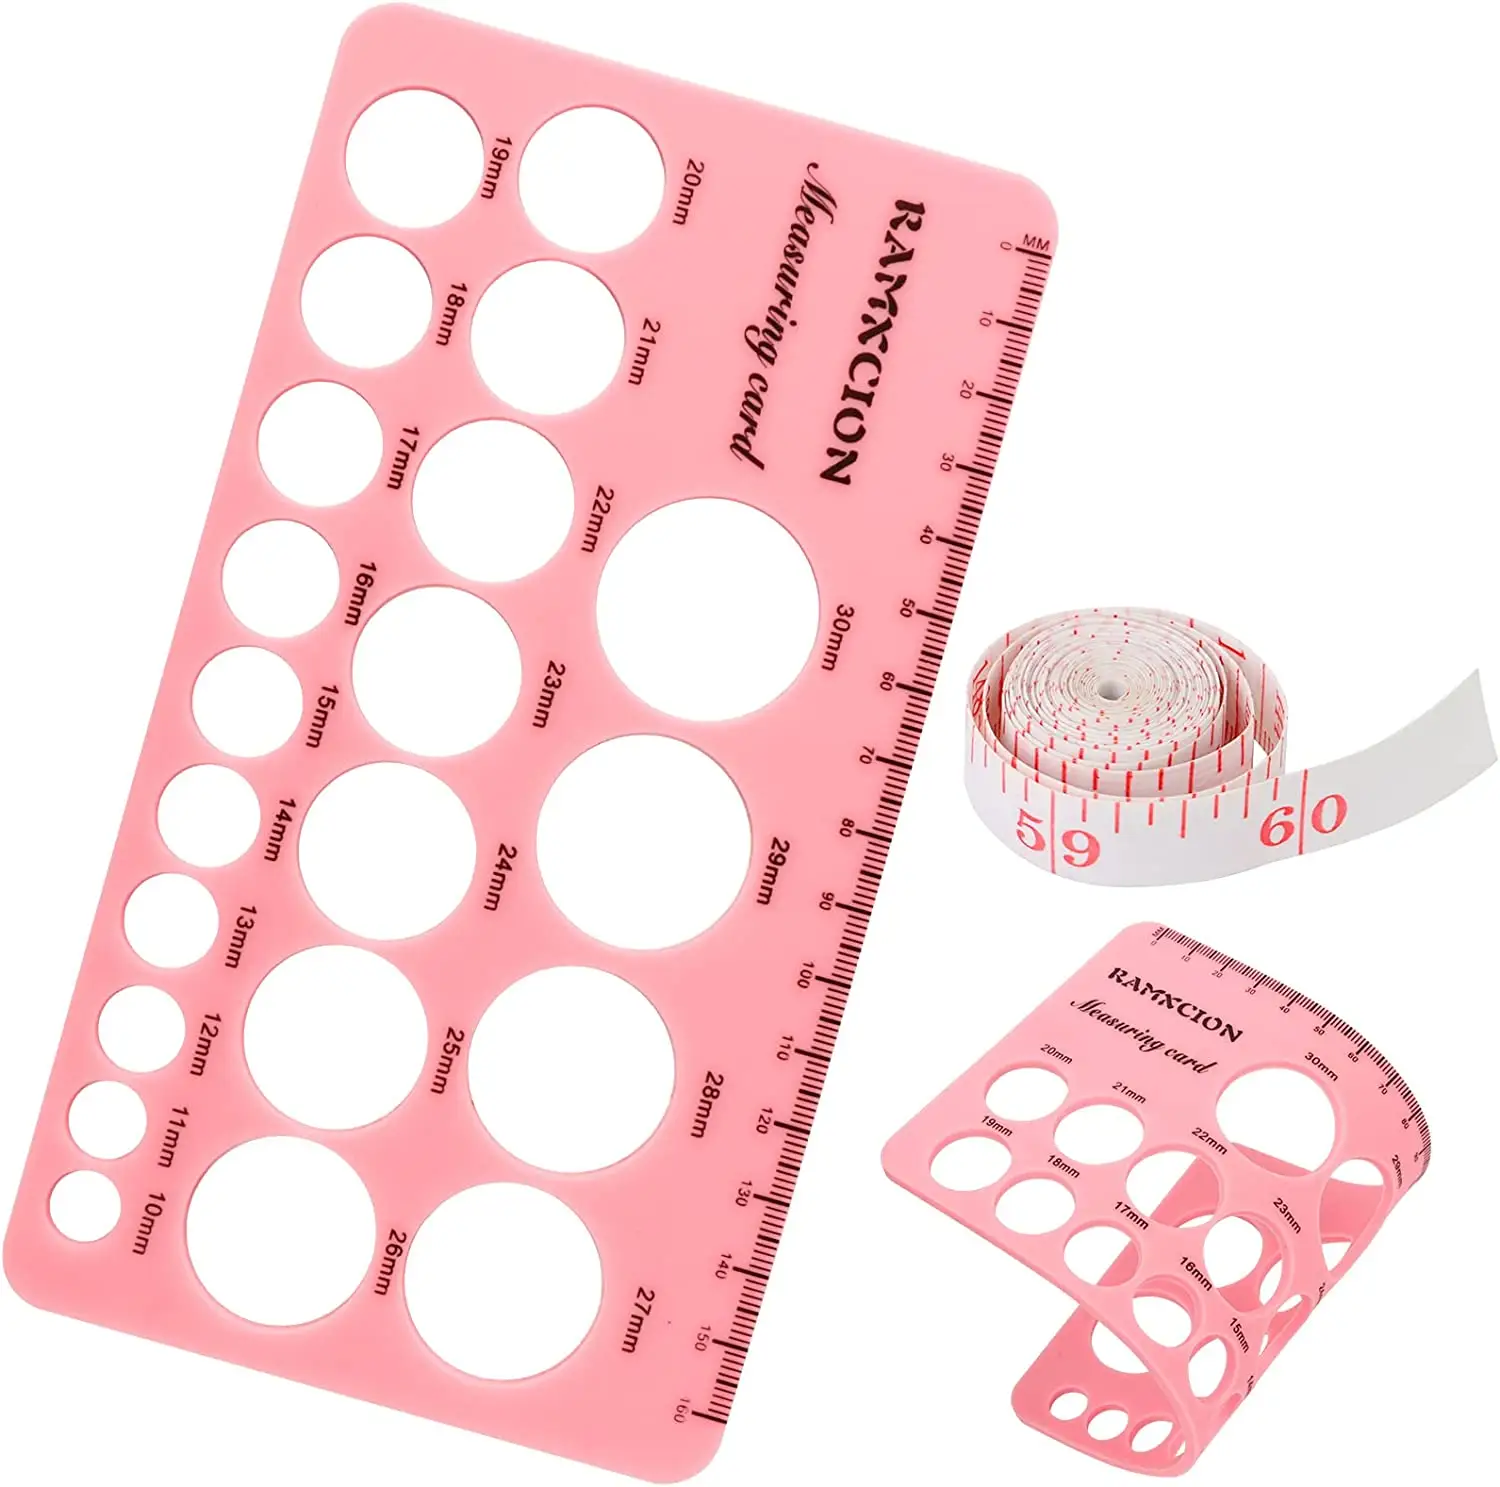 Silicone Nipples Ruler of Flange Size Measure for Nipple, Nipple Measurement Tool for Flanges Silicone and Soft in mm,